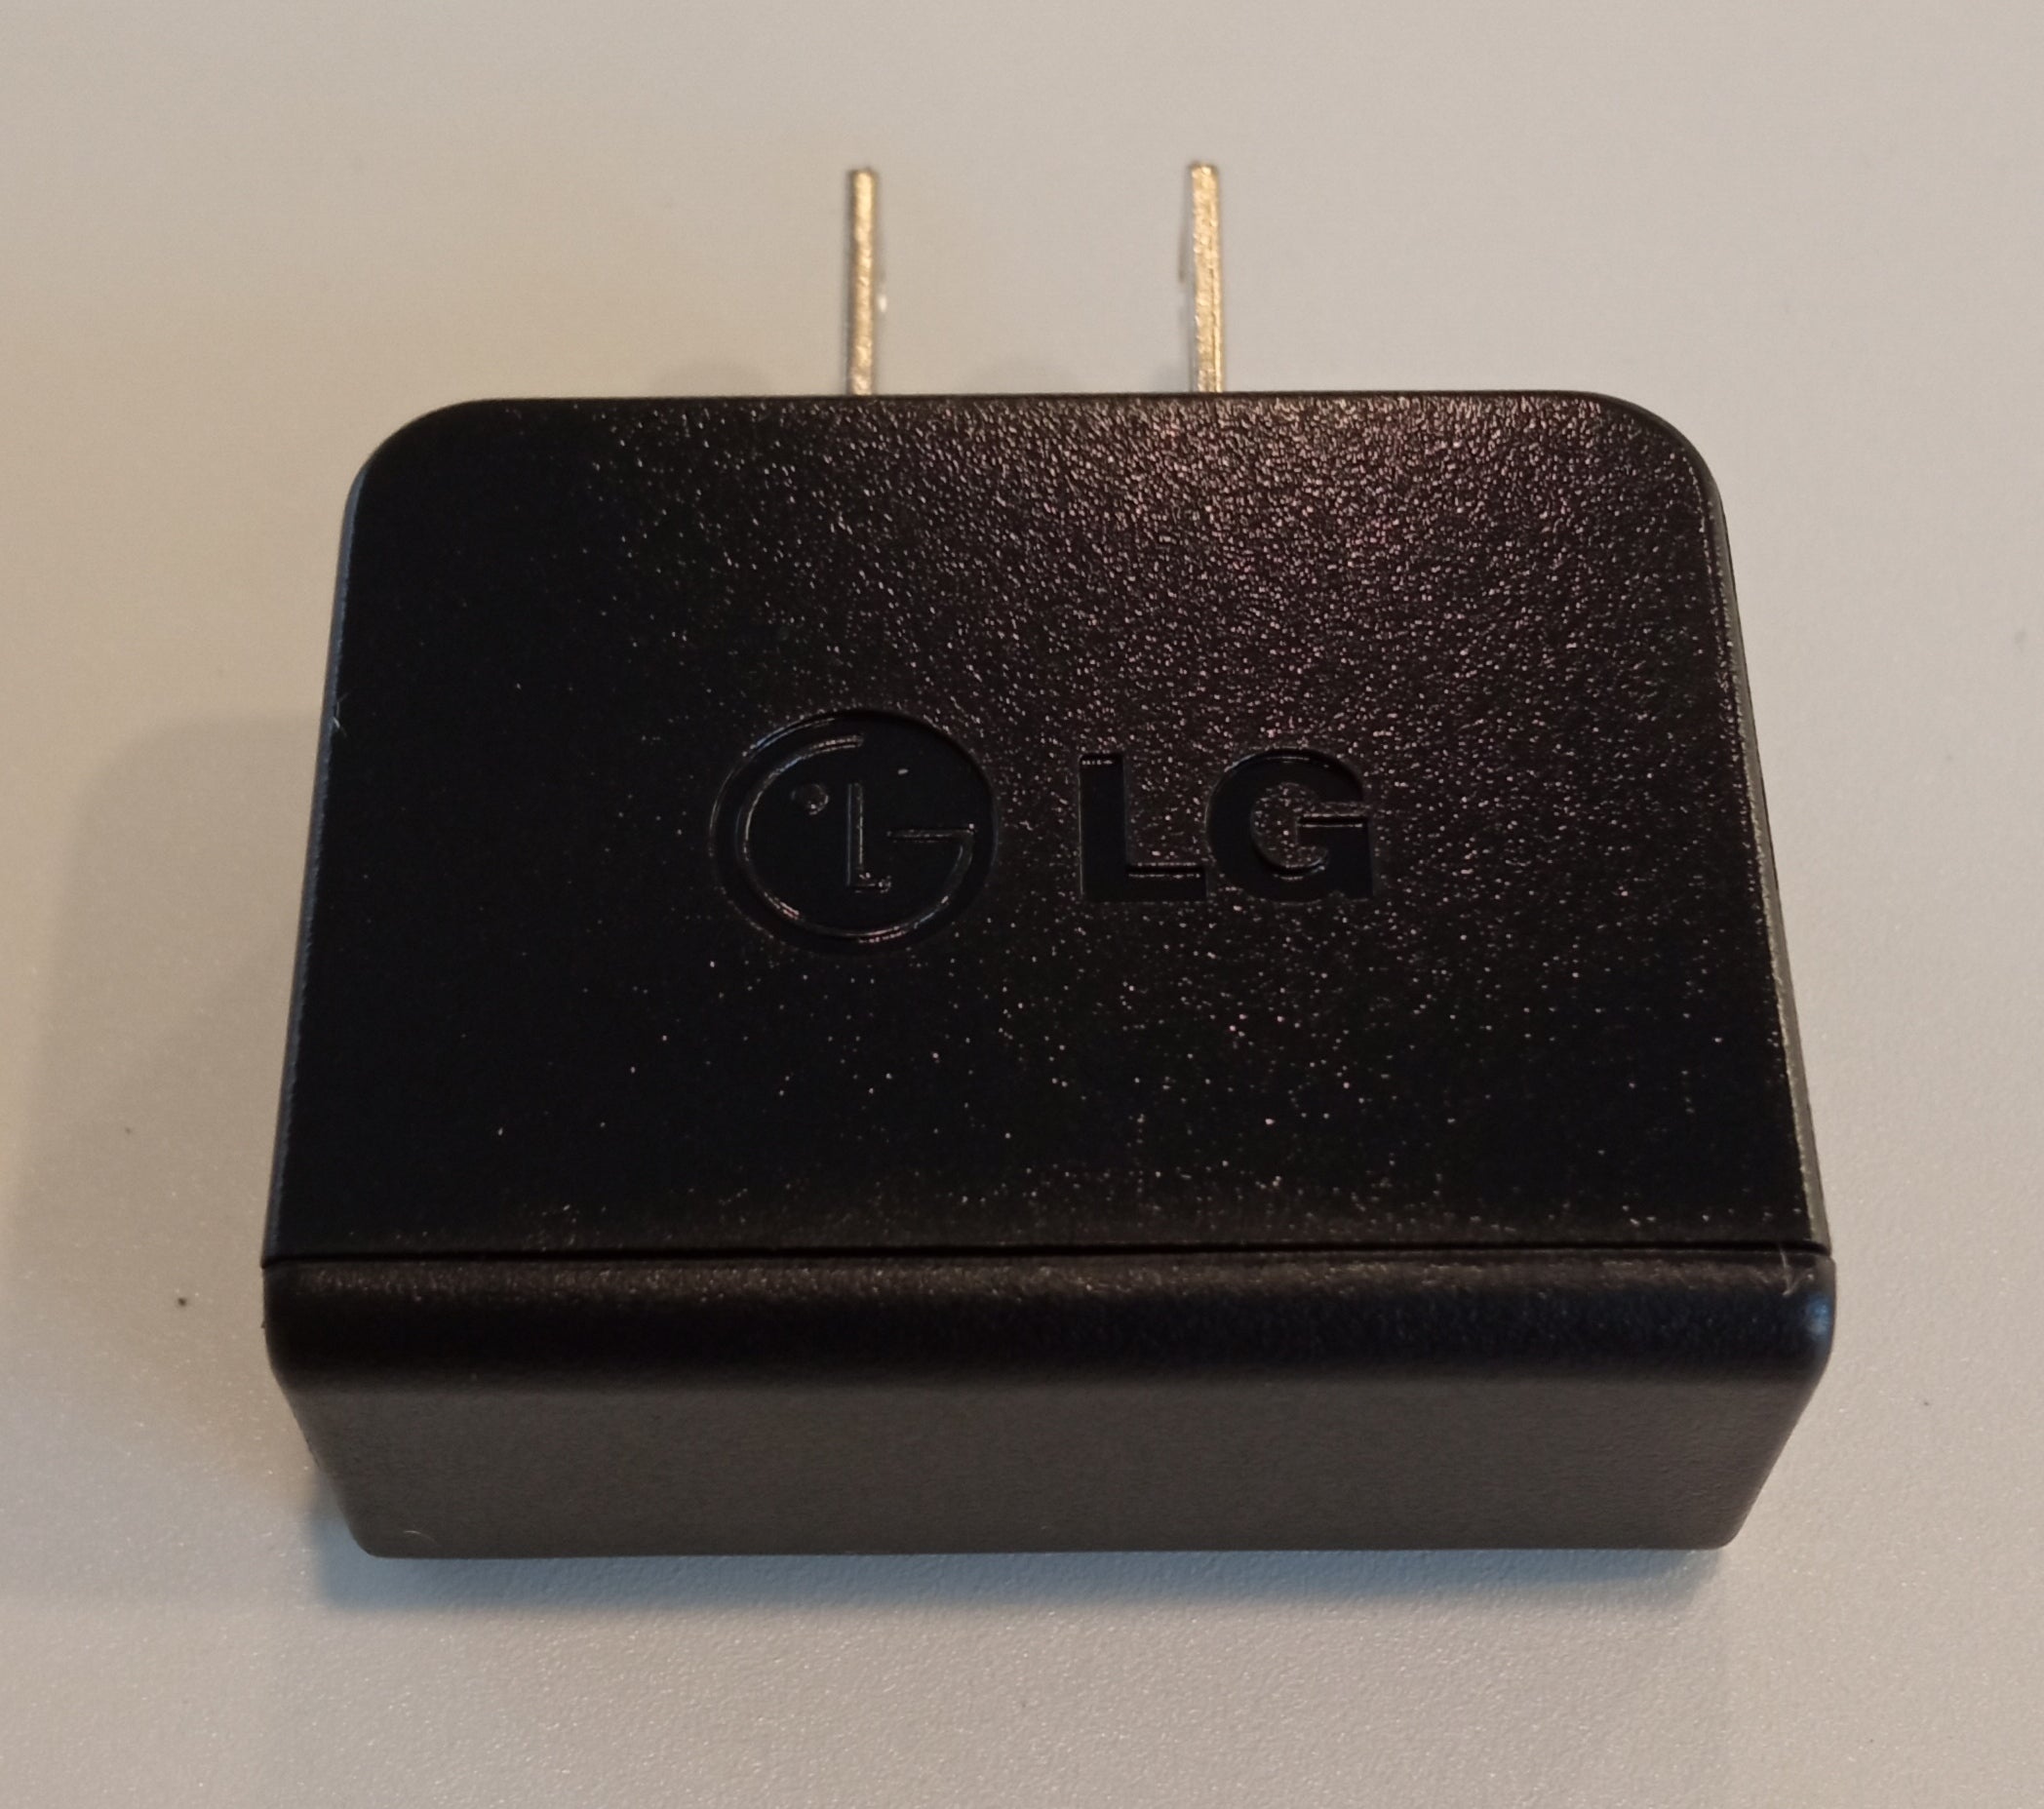 LG USB Adapter - US Imported